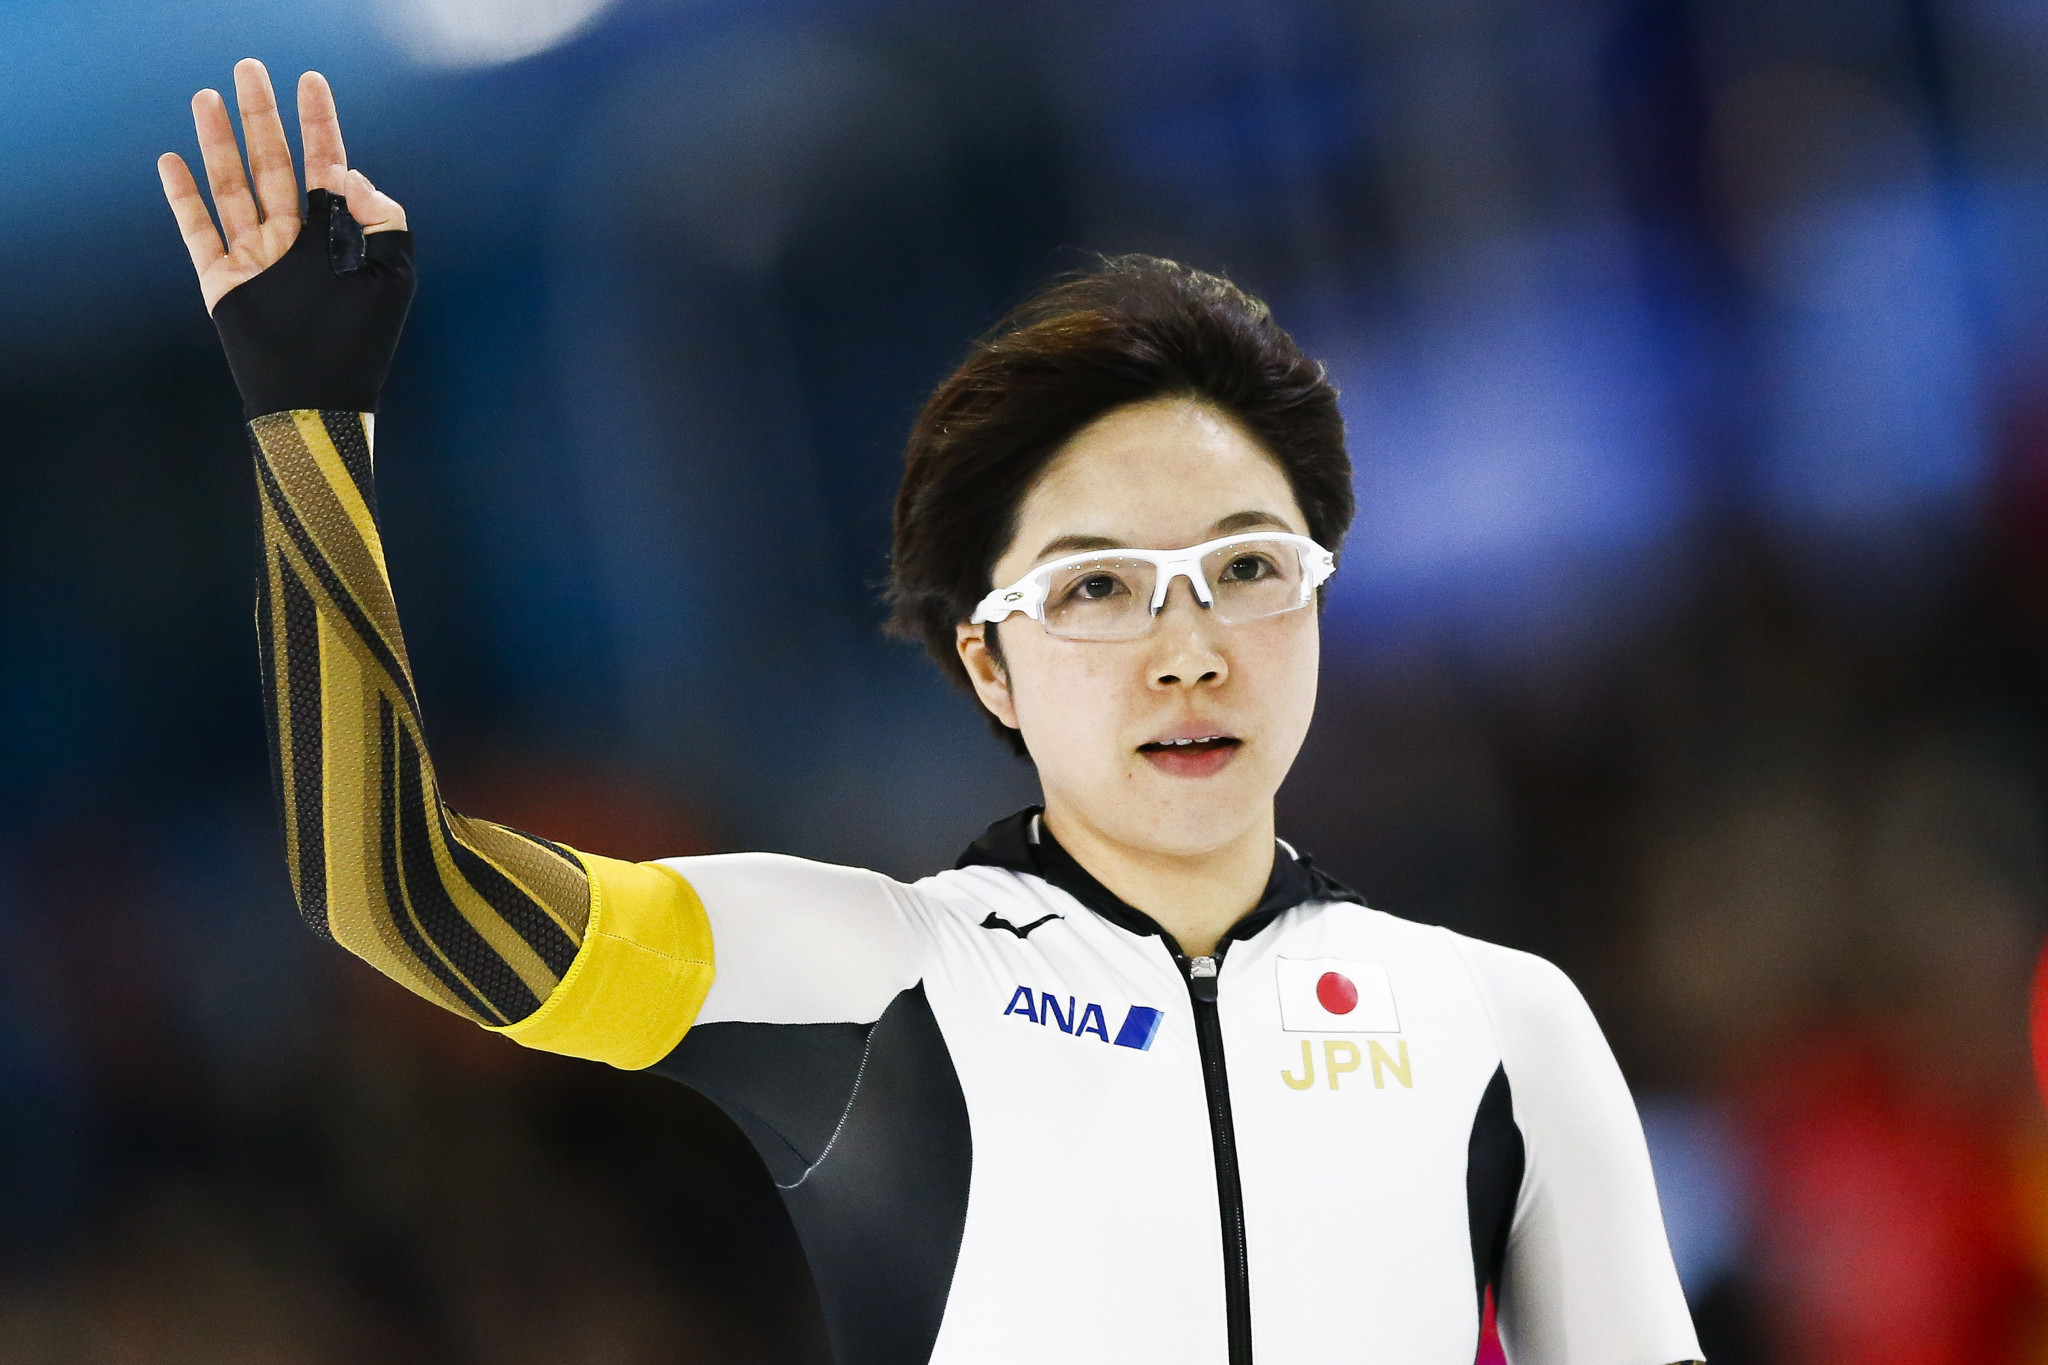 Nao Kodaira will return to the ISU Speed Skating World Cup circuit in Poland ©Getty Images